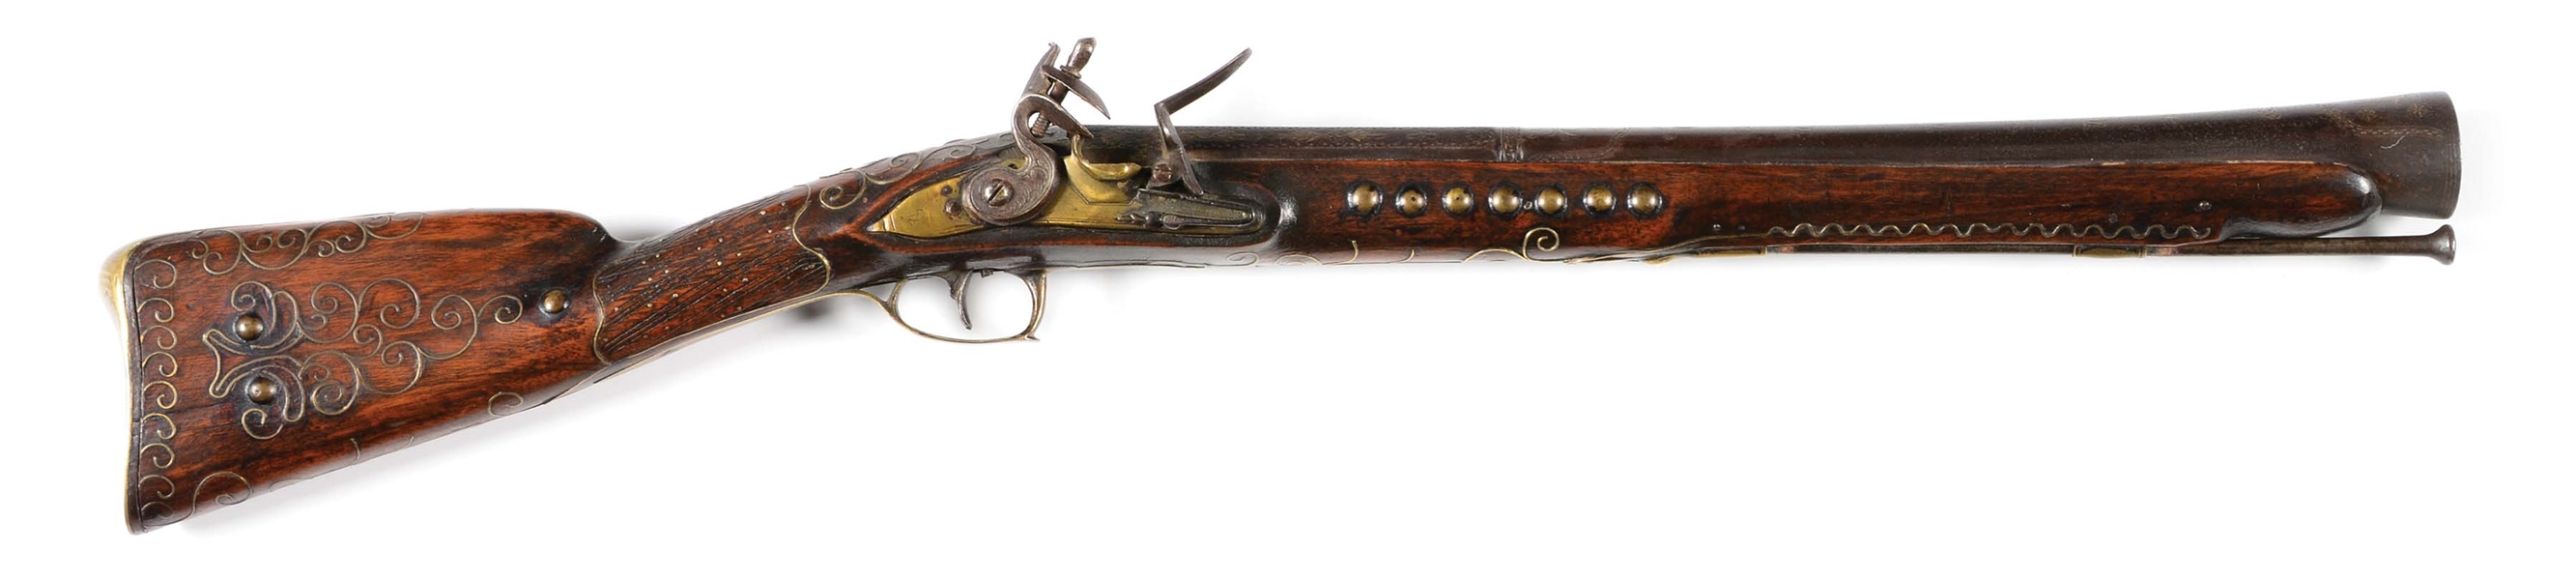 (A) A GOOD, PROBABLY MIDDLE EASTERN, DECORATED FLINTLOCK BLUNDERBUSS.